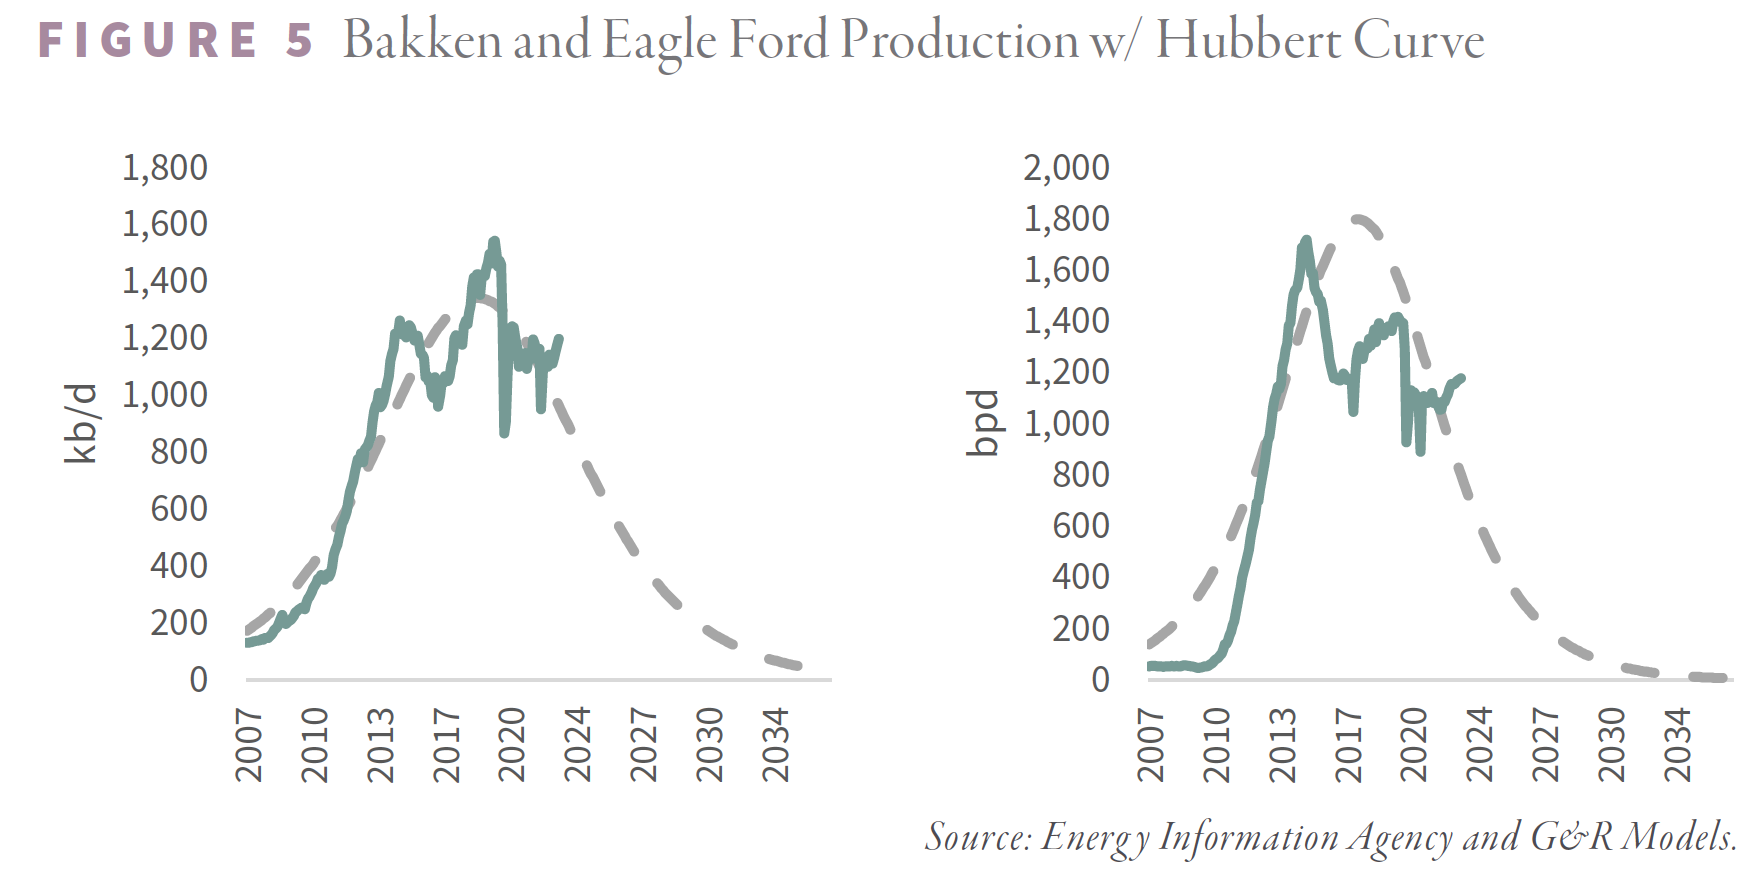 Bakken and Eagle Ford Production with Hubbert Curve